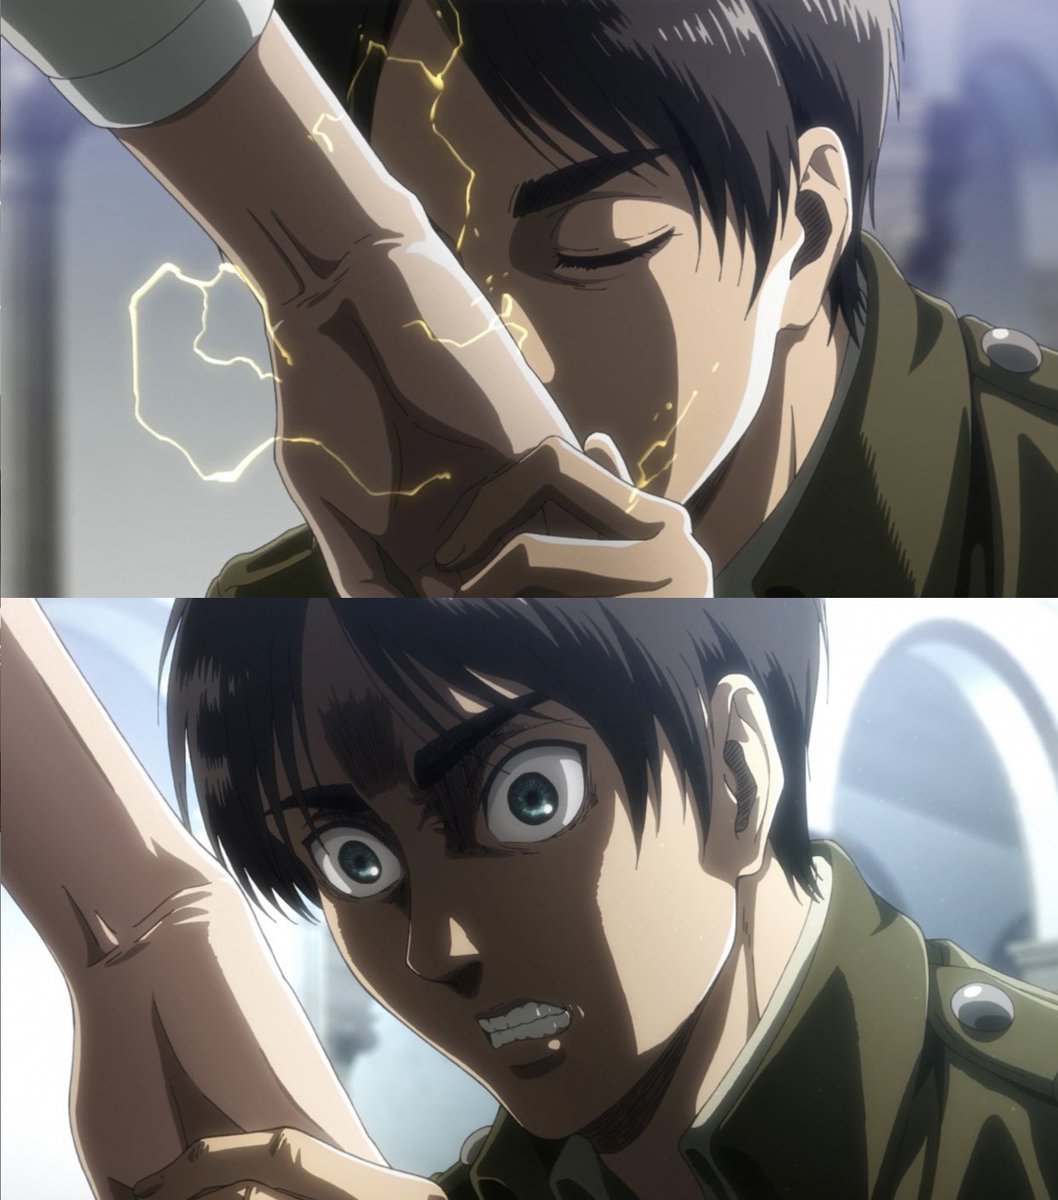 4 years ago today, Eren had the entire final season spoiled for him